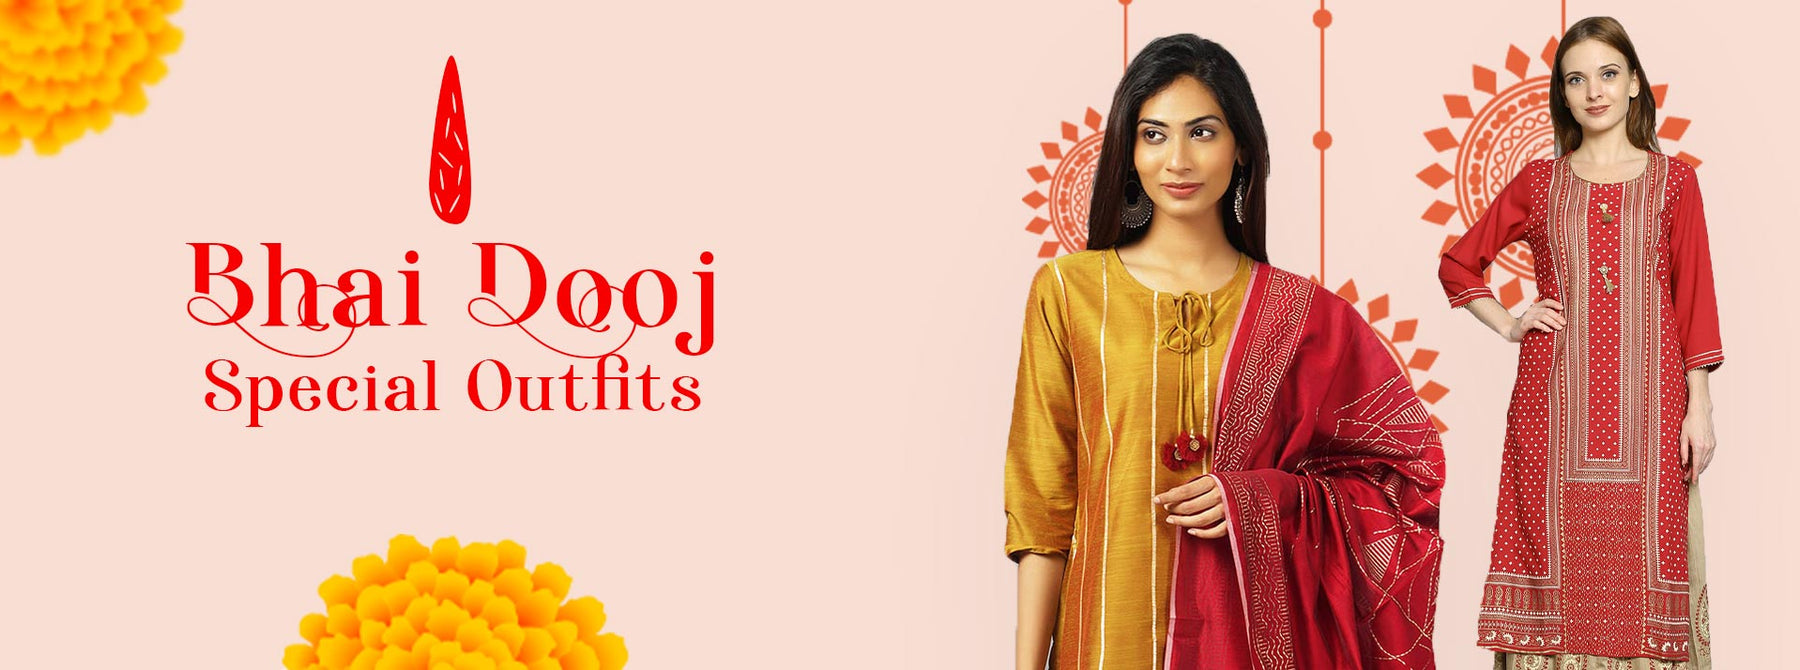 Celebrate Bhai Dooj A Festival of Sibling Bond with an Ethnic Touch